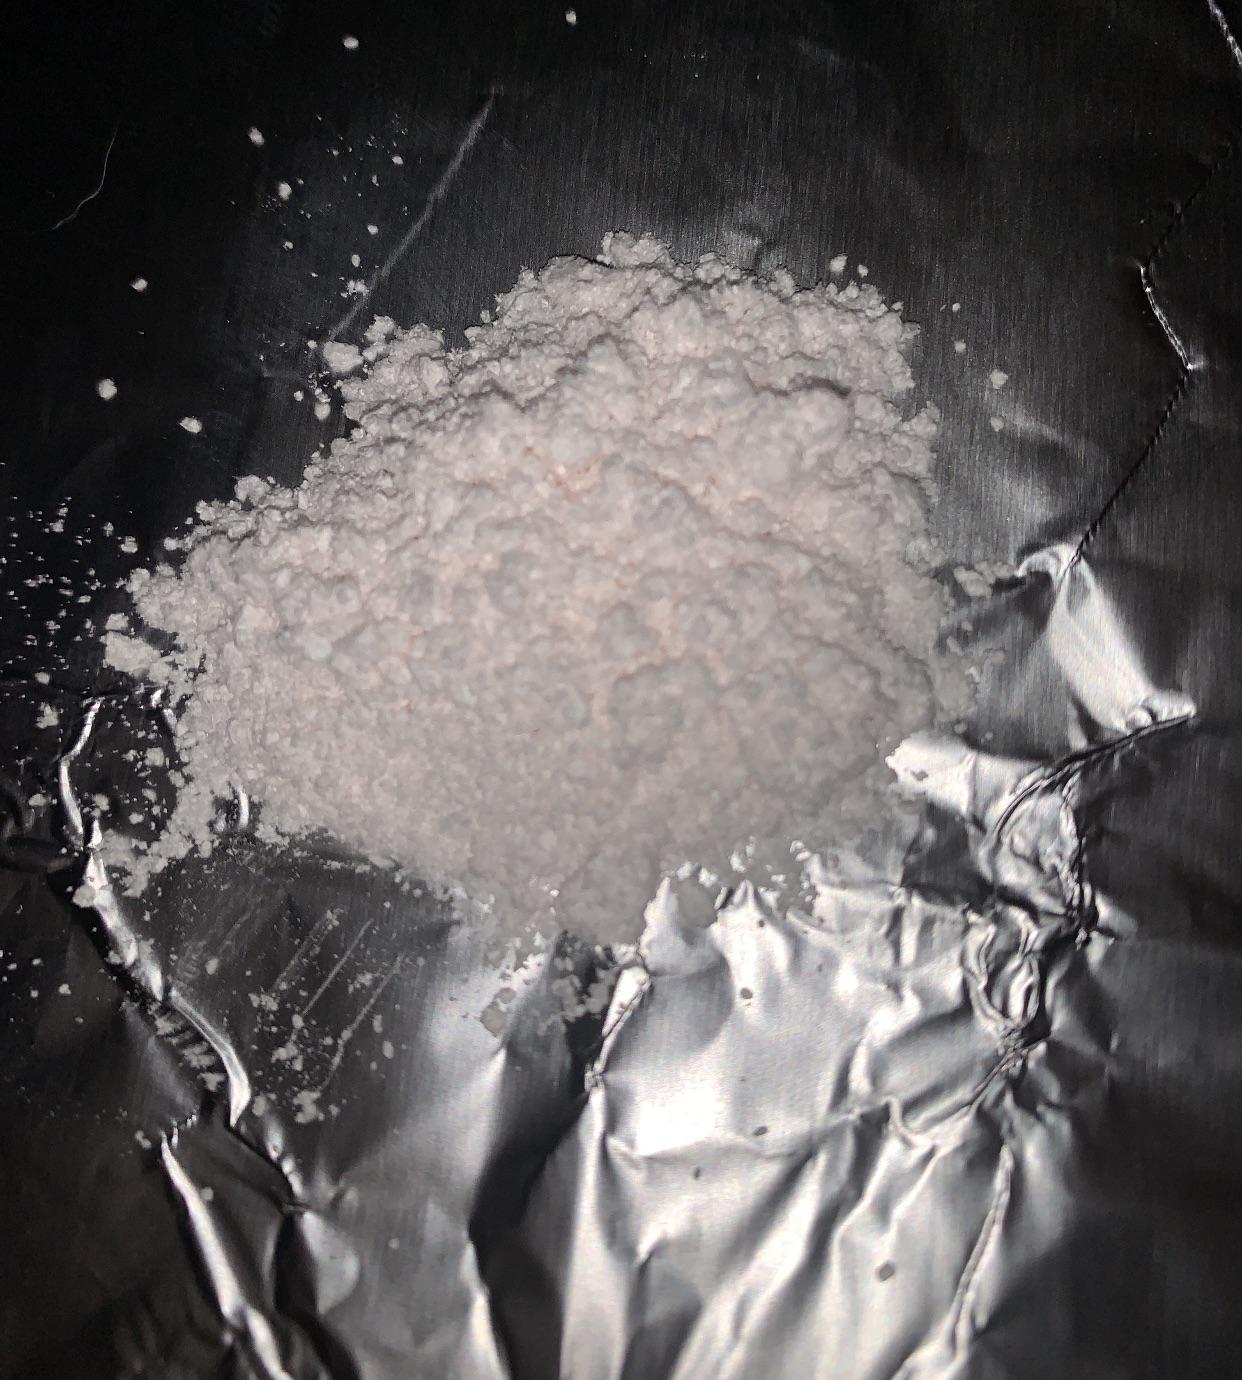  Buy 2C-B Powder,Buy 5CL-ADB-A online,  Buy 5CL-ADB-A Online, Buy 5CL ADB A cannabinoid, online chemicals available, Cannabinoids ,stimulants, synthetic cathinones, flualprazolam for sale,buy a-pvp crystal powder online, us chemical supply, buy research chemicals, chemicals